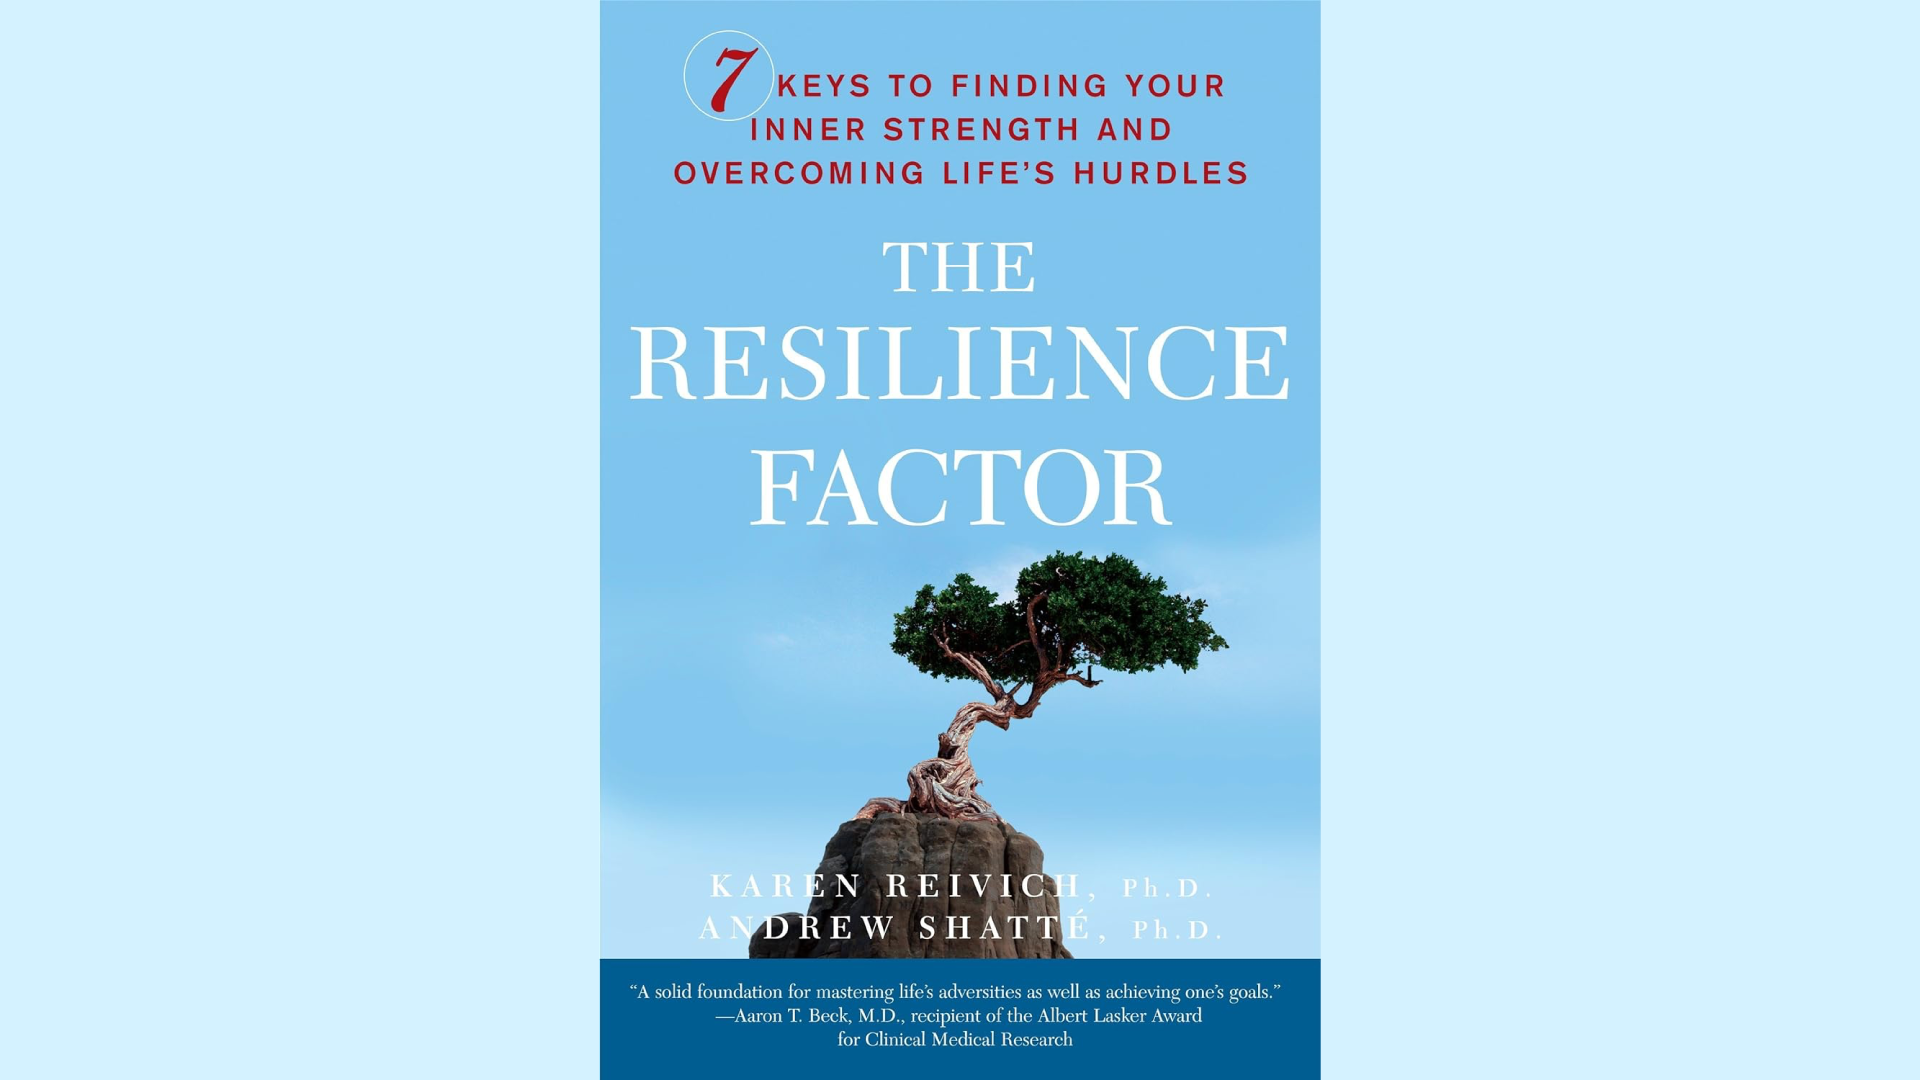 Summary: The Resilience Factor by Karen Reivich and Andrew Shatté